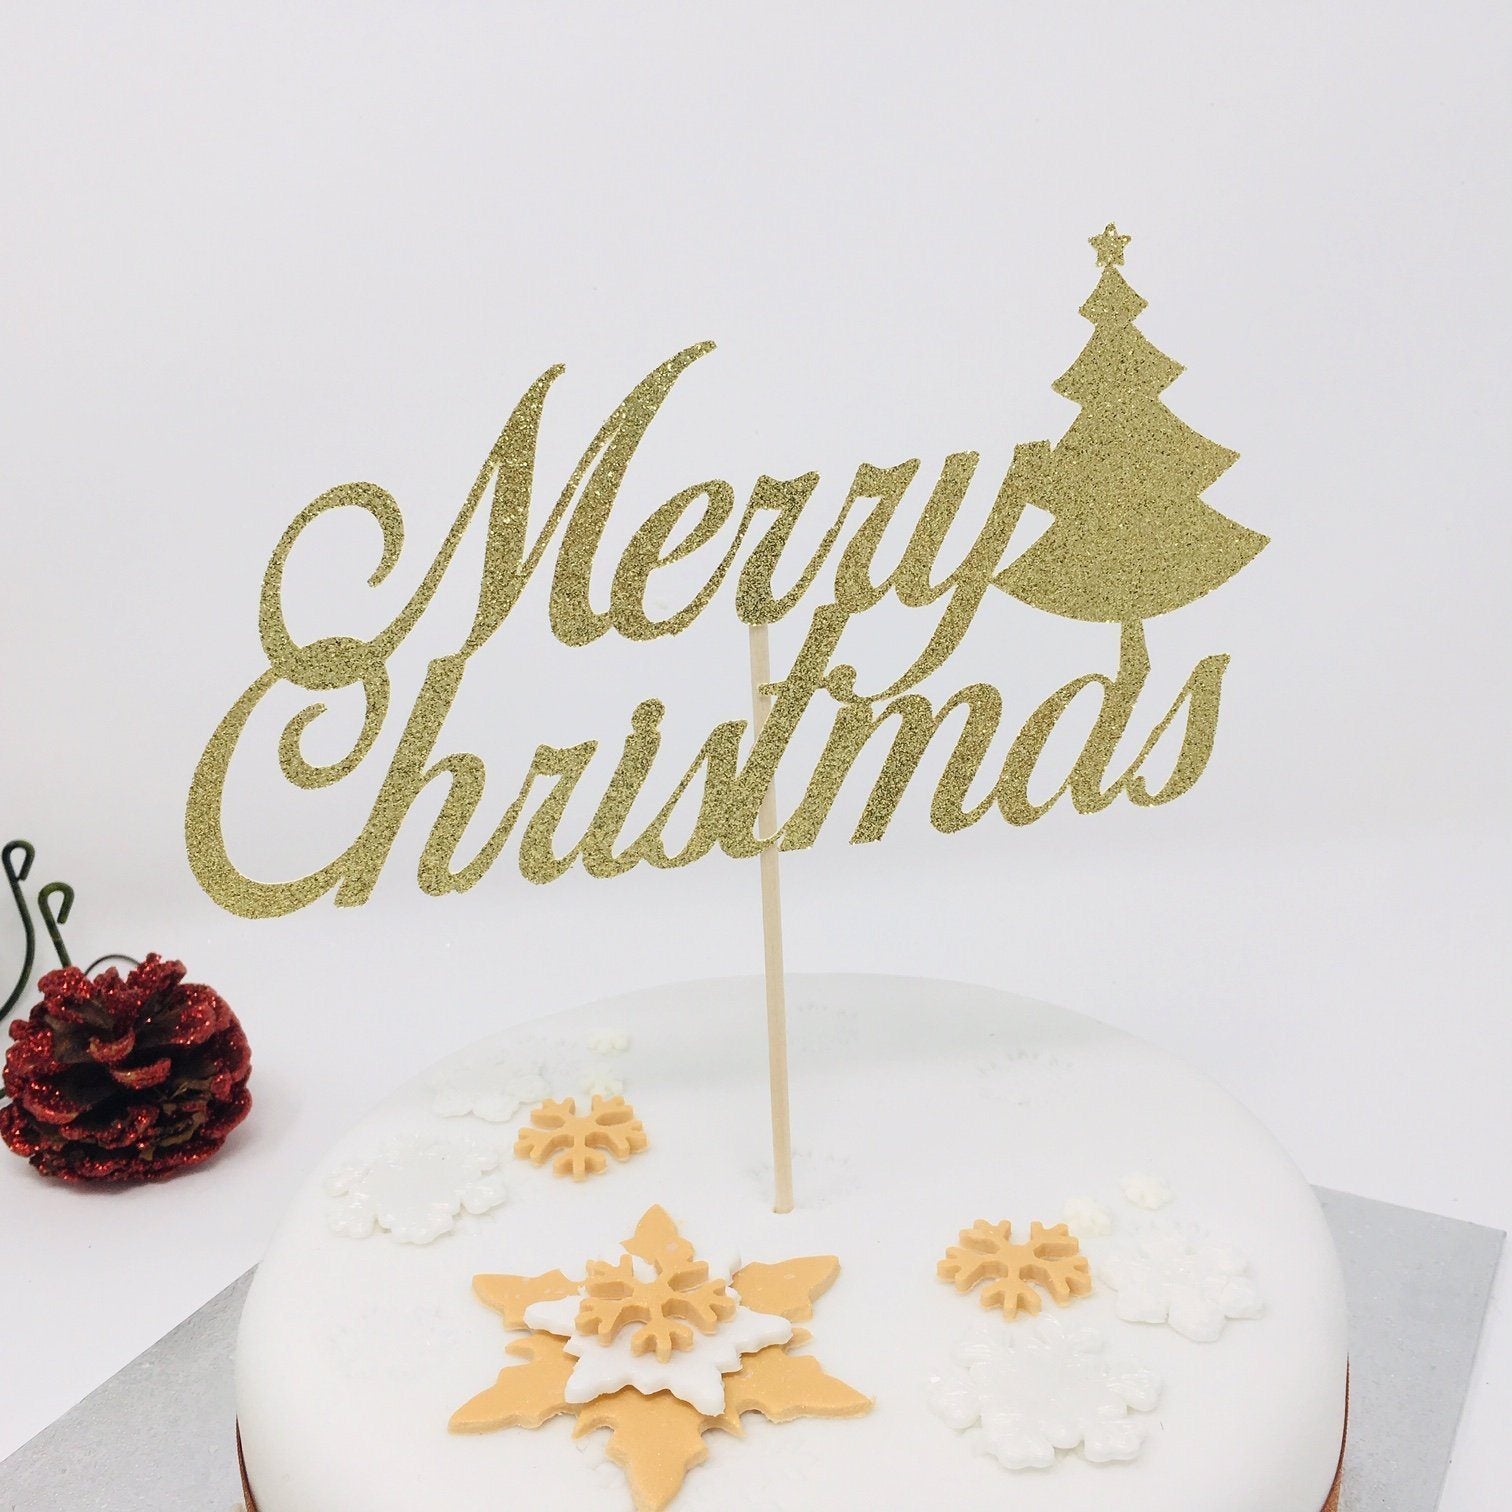 Merry Christmas Cake Topper with Christmas Tree